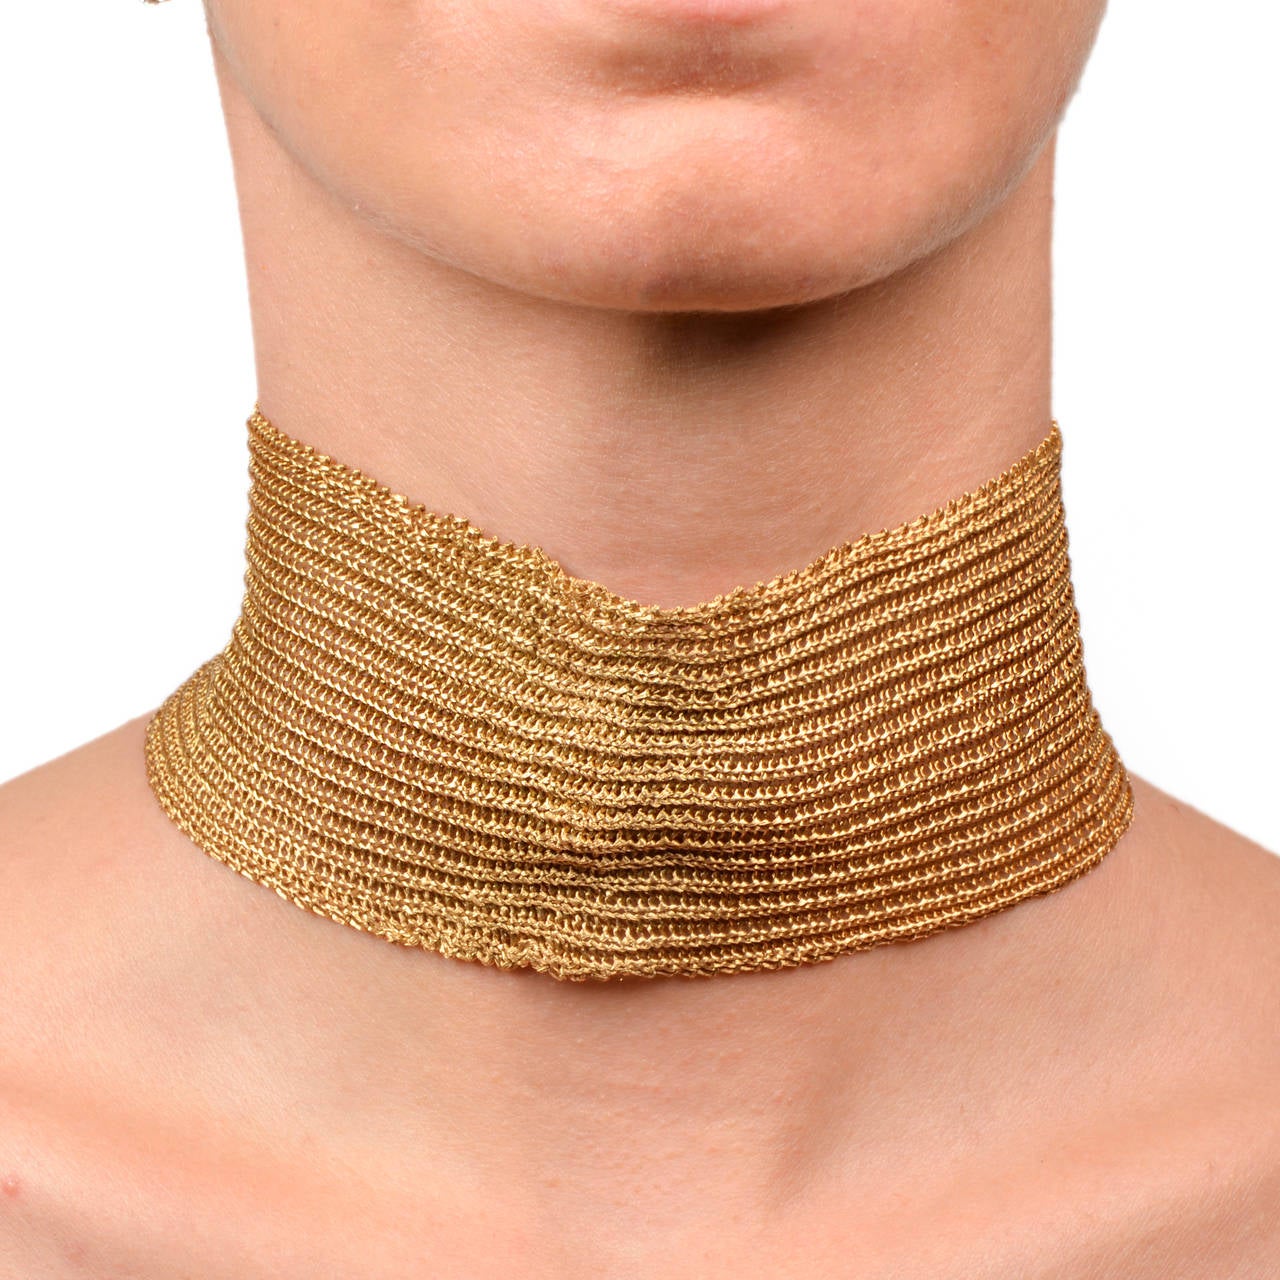 This choker necklace is crafted in solid 18k  yellow gold, weighing approx. 55.9 grams and measuring (adjustable to 14.5